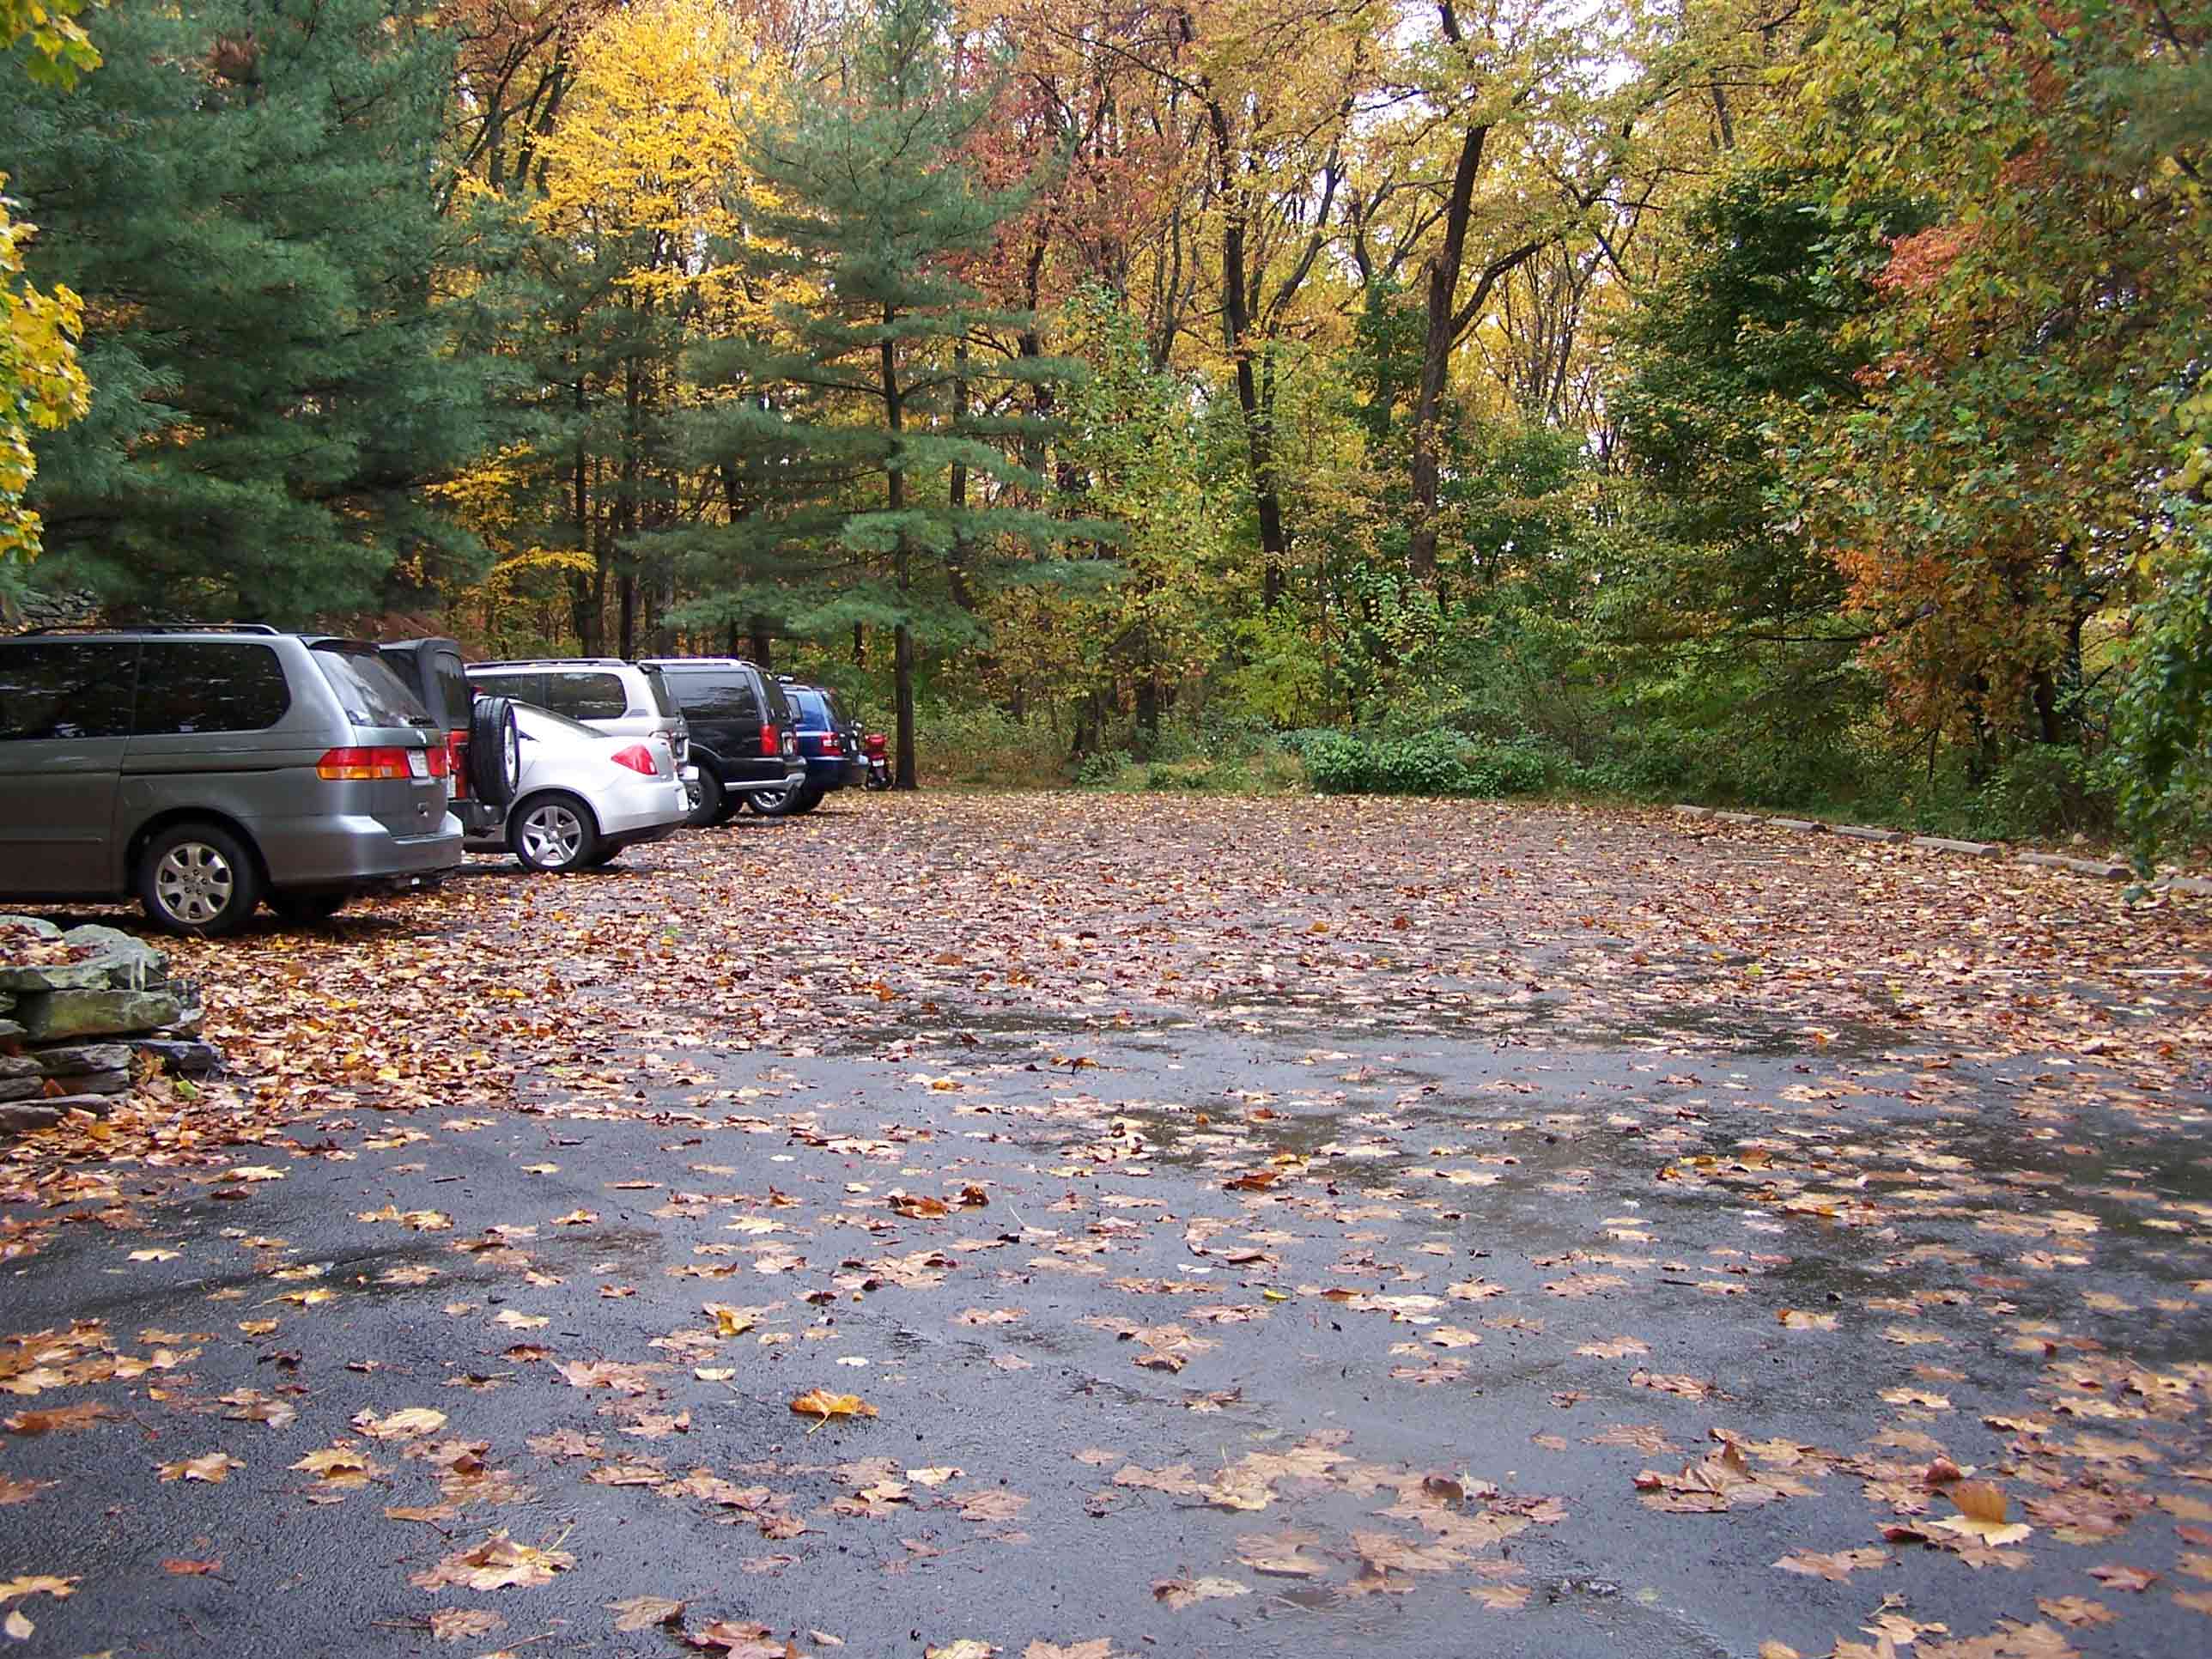 mm 0.0 - Parking at Gathland State Park. Courtesy at@rohland.org